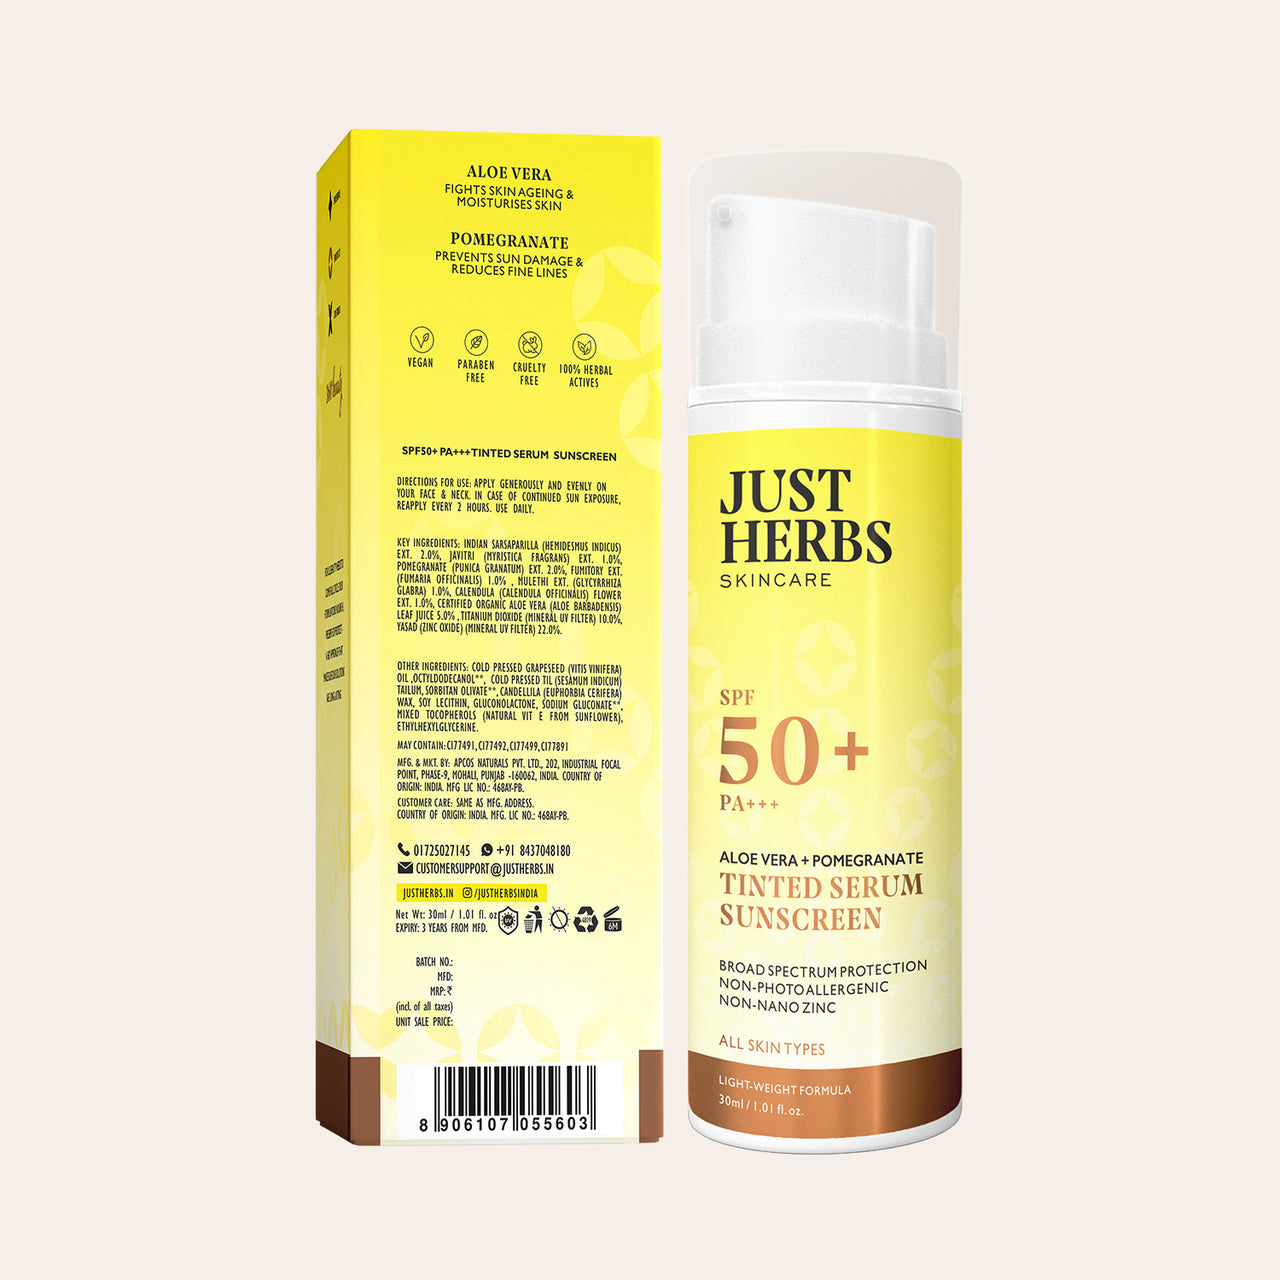 Tinted Serum Sunscreen with SPF 50+ PA+++  - 30ml